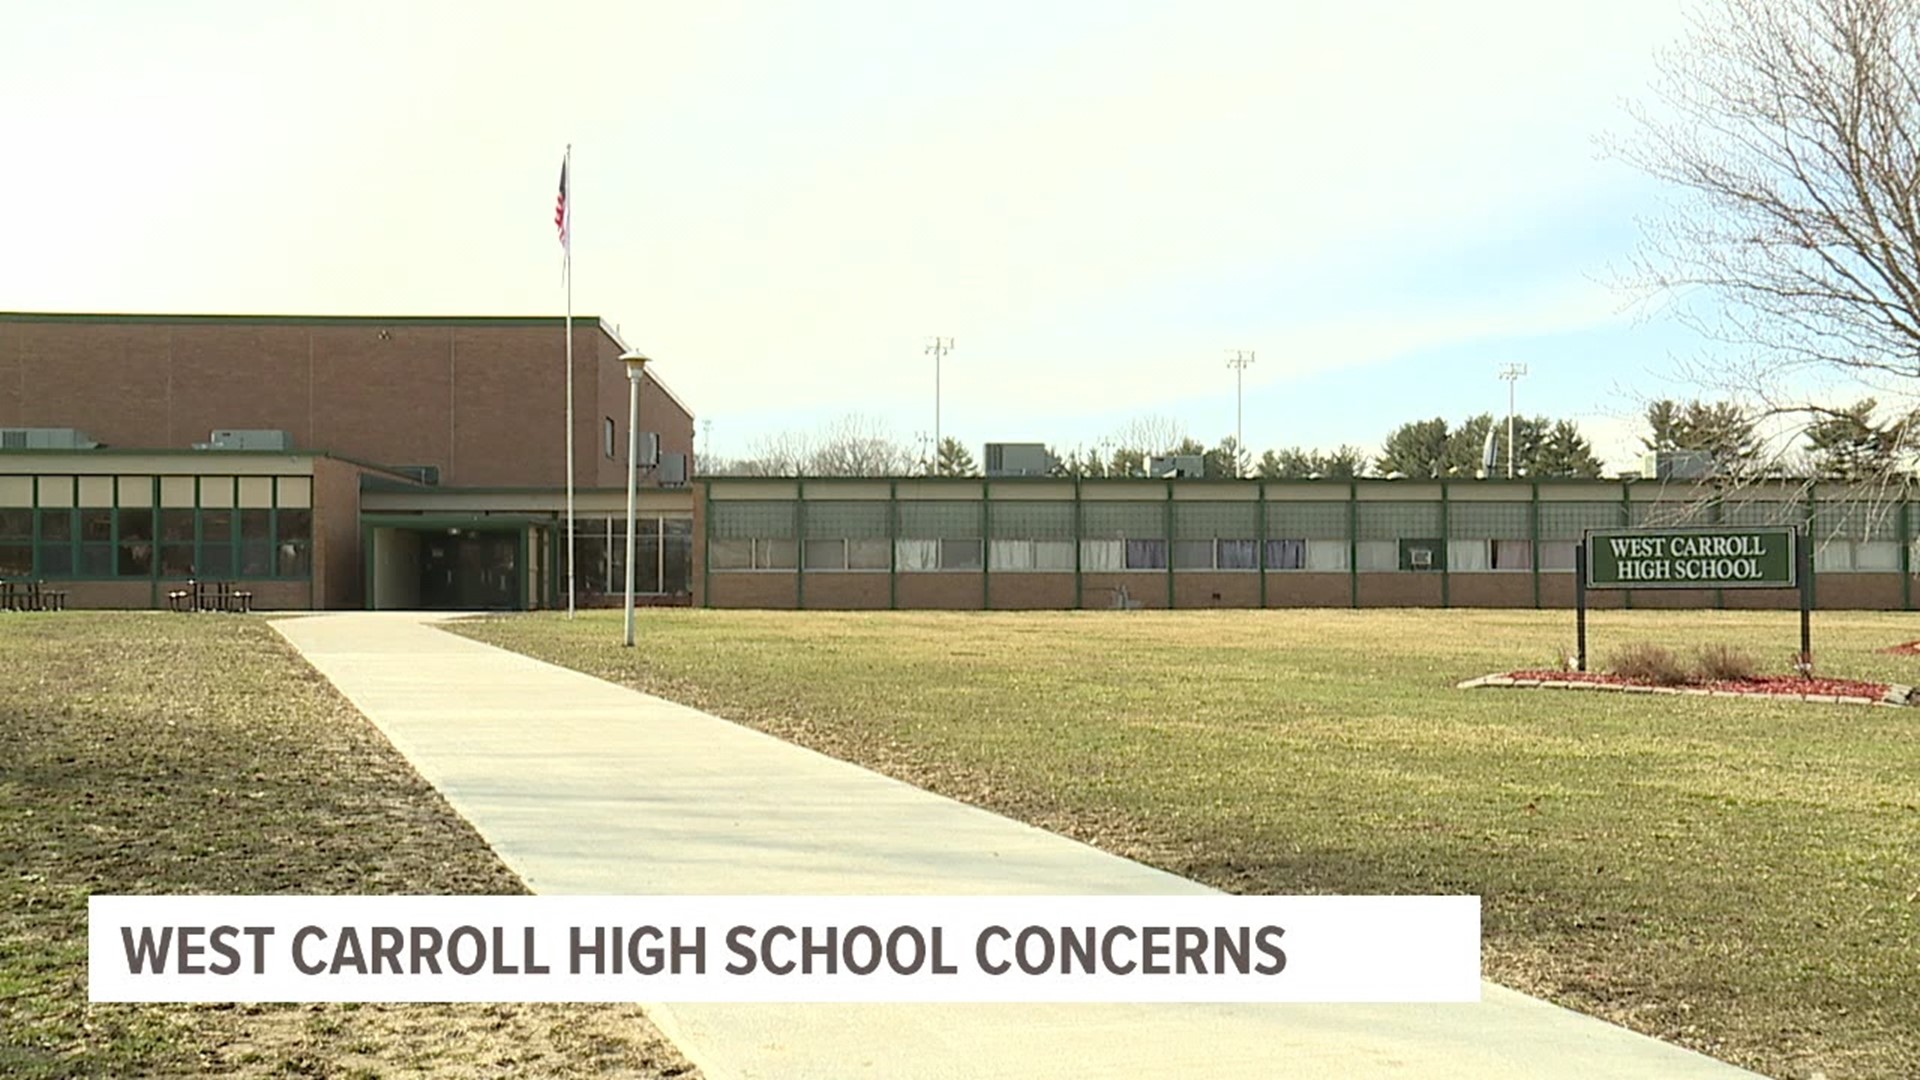 The talks also come with the possibility of upgrading its high school that has experienced health-related issues like asbestos and lead, officials say.